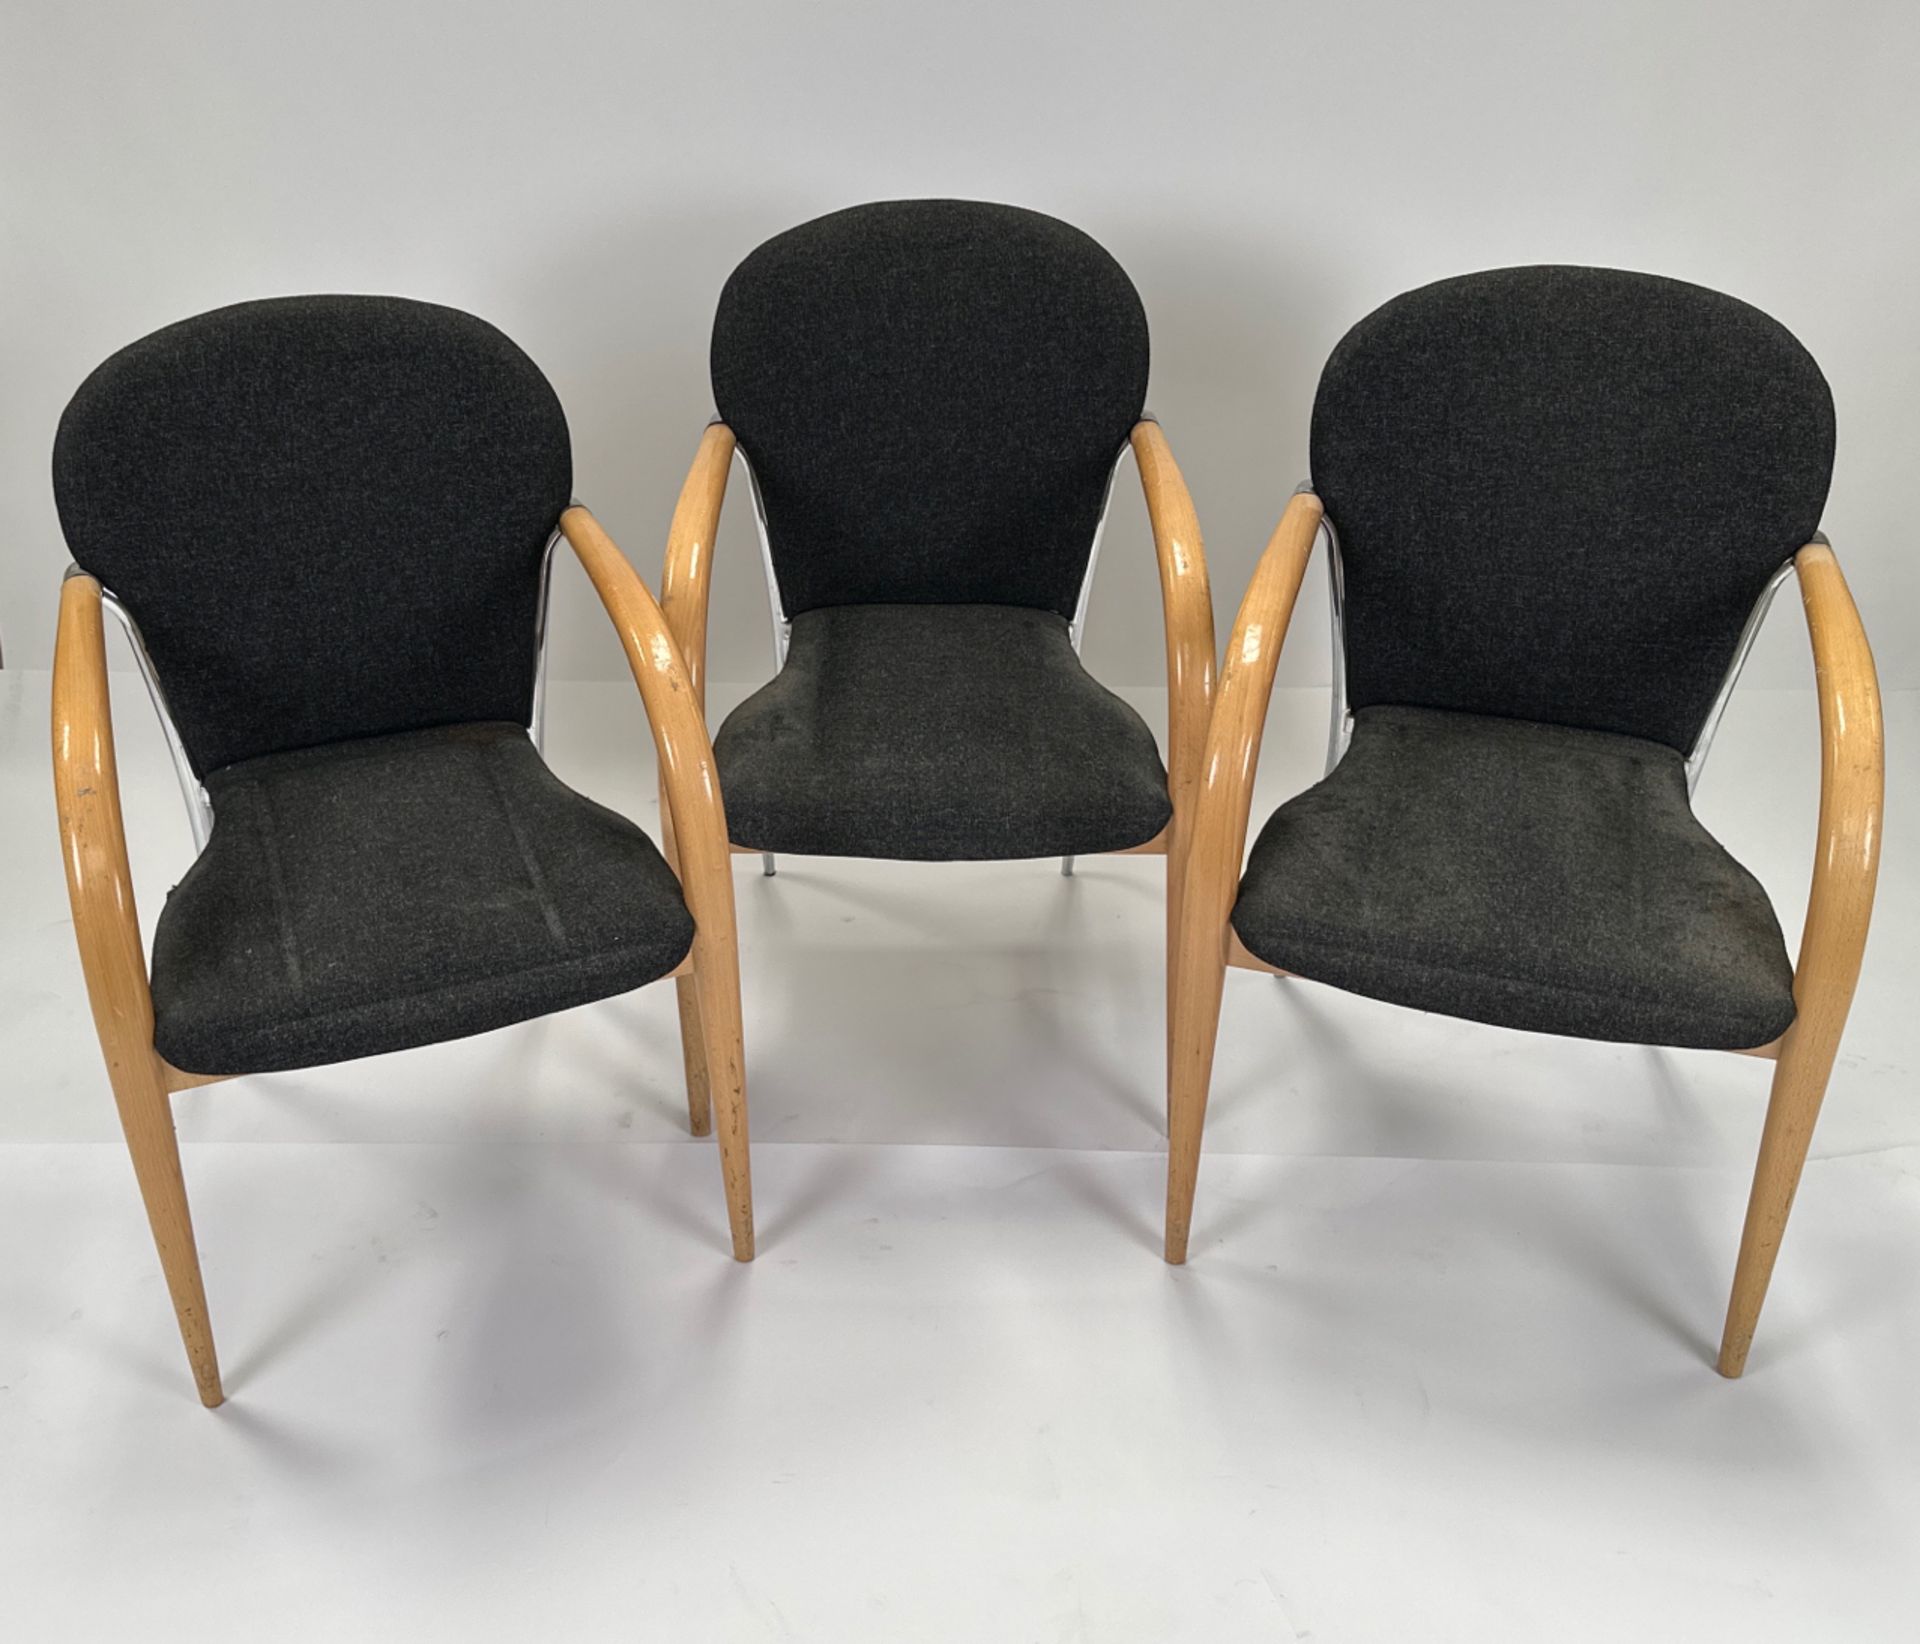 Trio of Conference / Office Chairs - Image 2 of 5